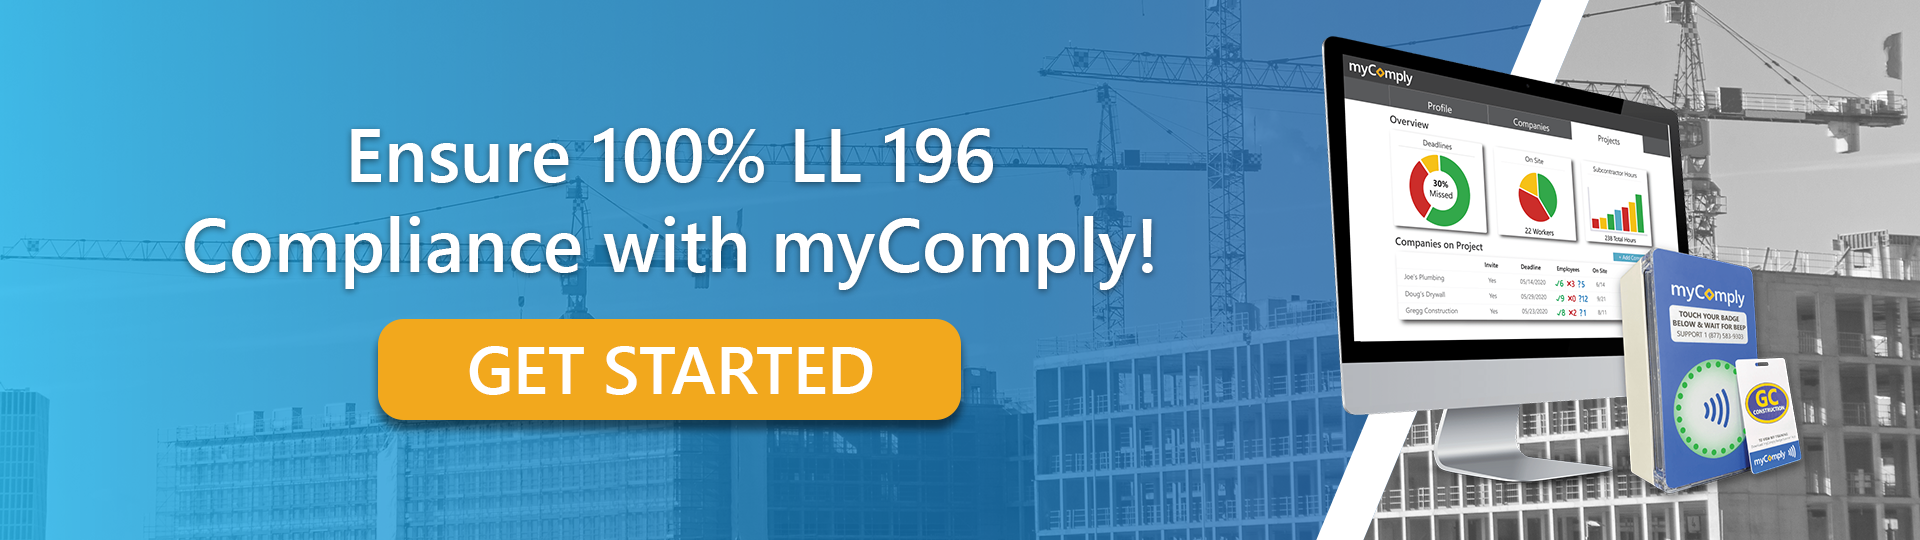 Ensure 100% LL 196 Compliance with myComply